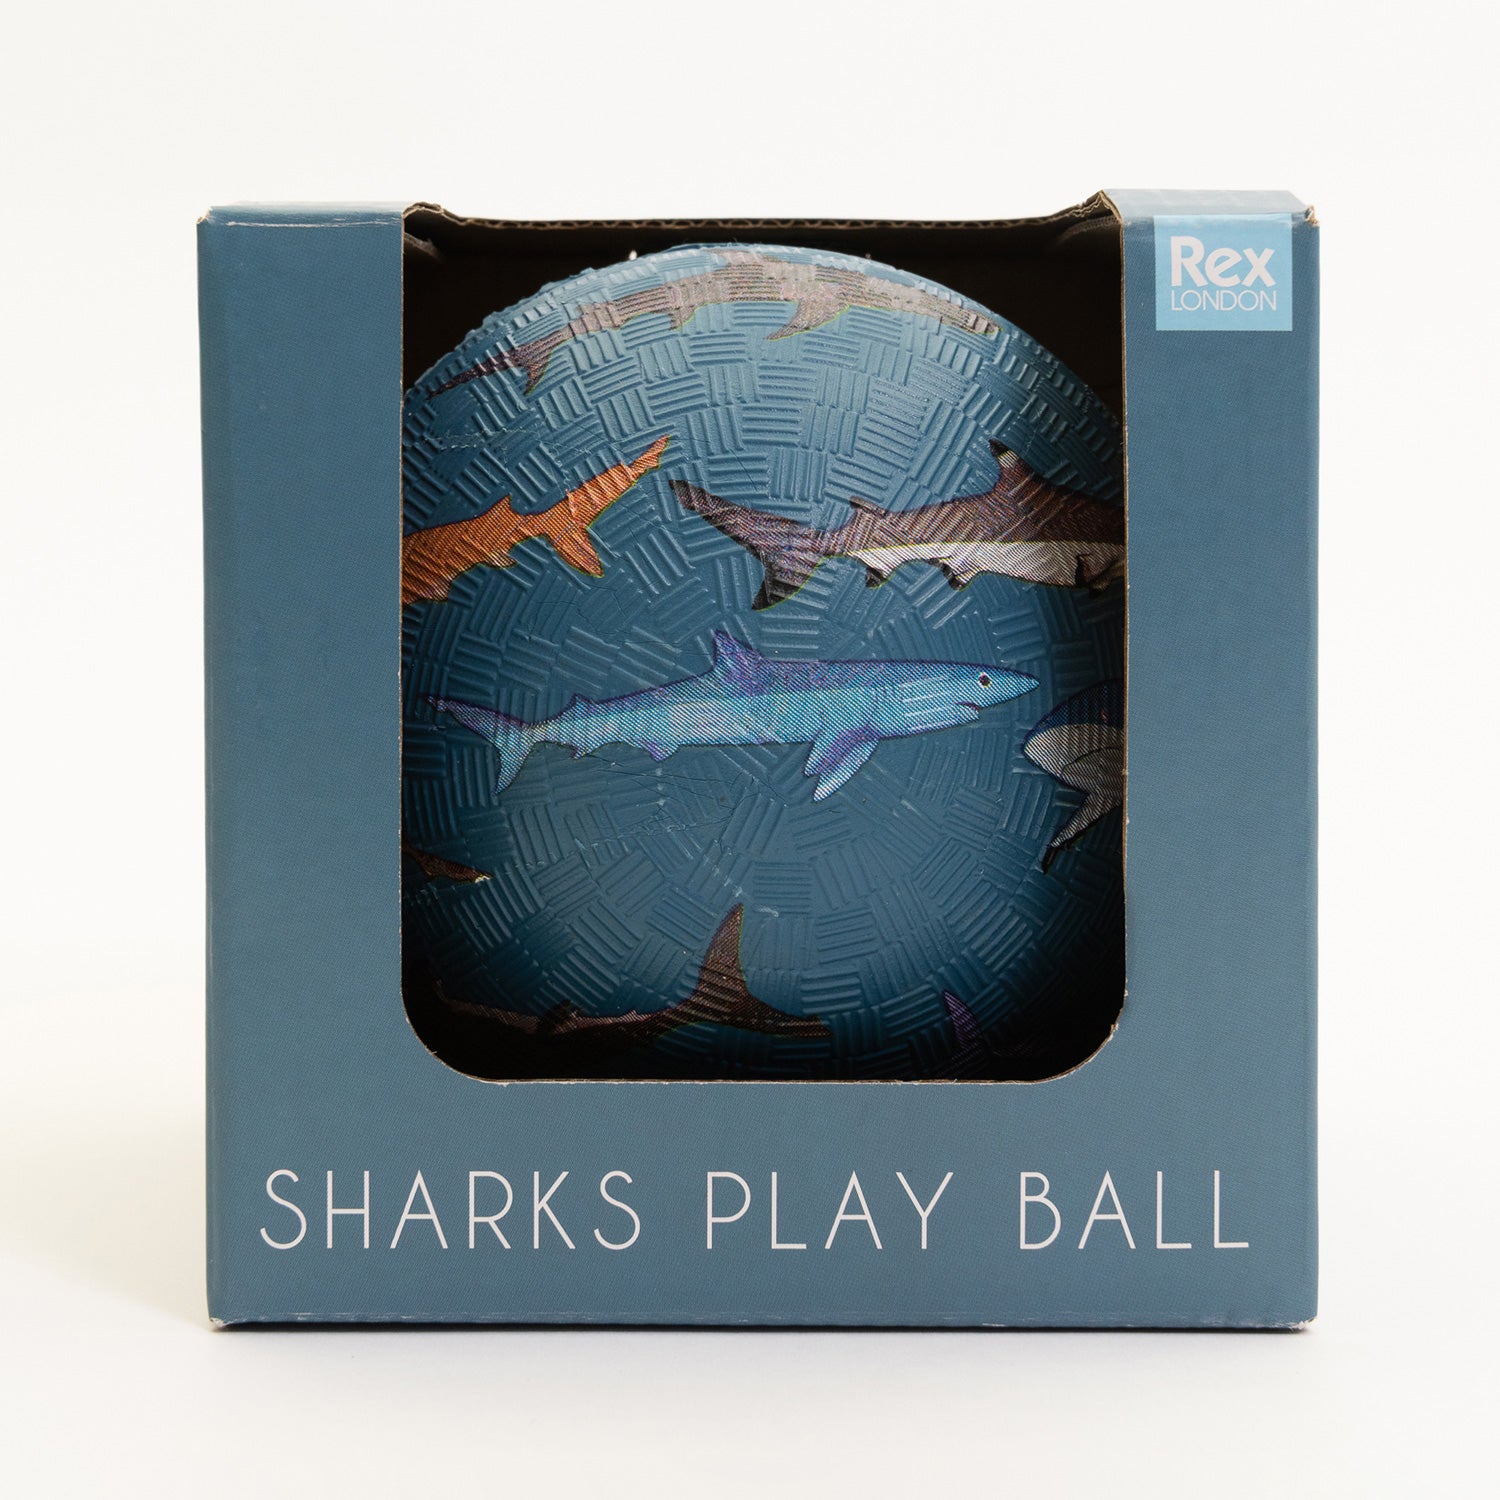 A blue rubber ball with shark designs on it. Pictured in a blue cardboard box on a white background.